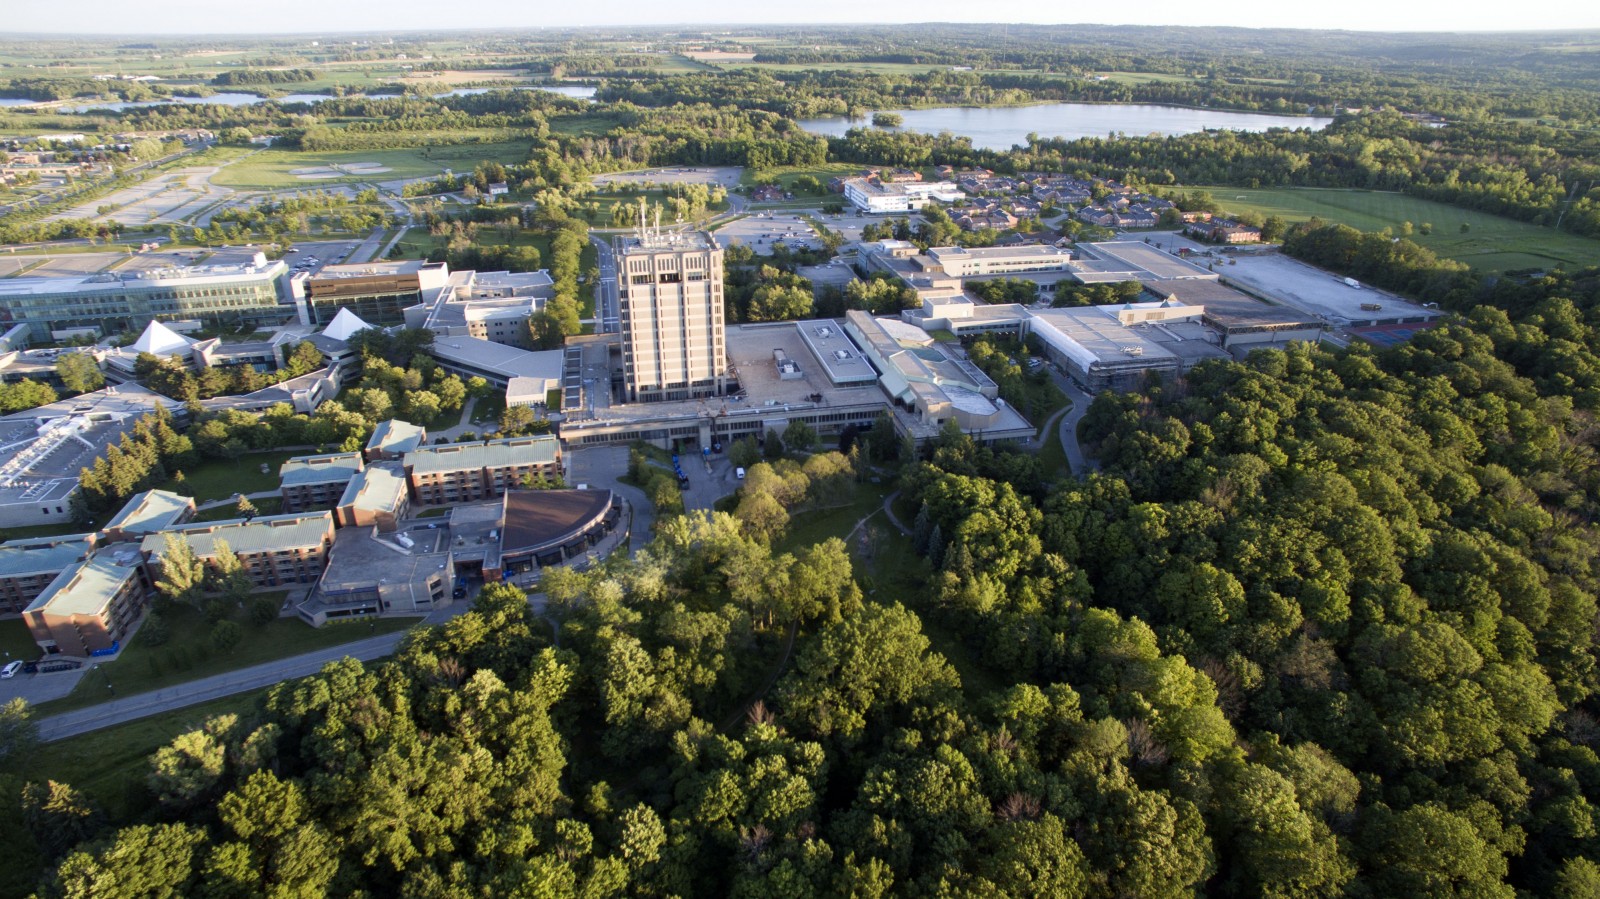 An aerial view of a school campus surrounded by trees.